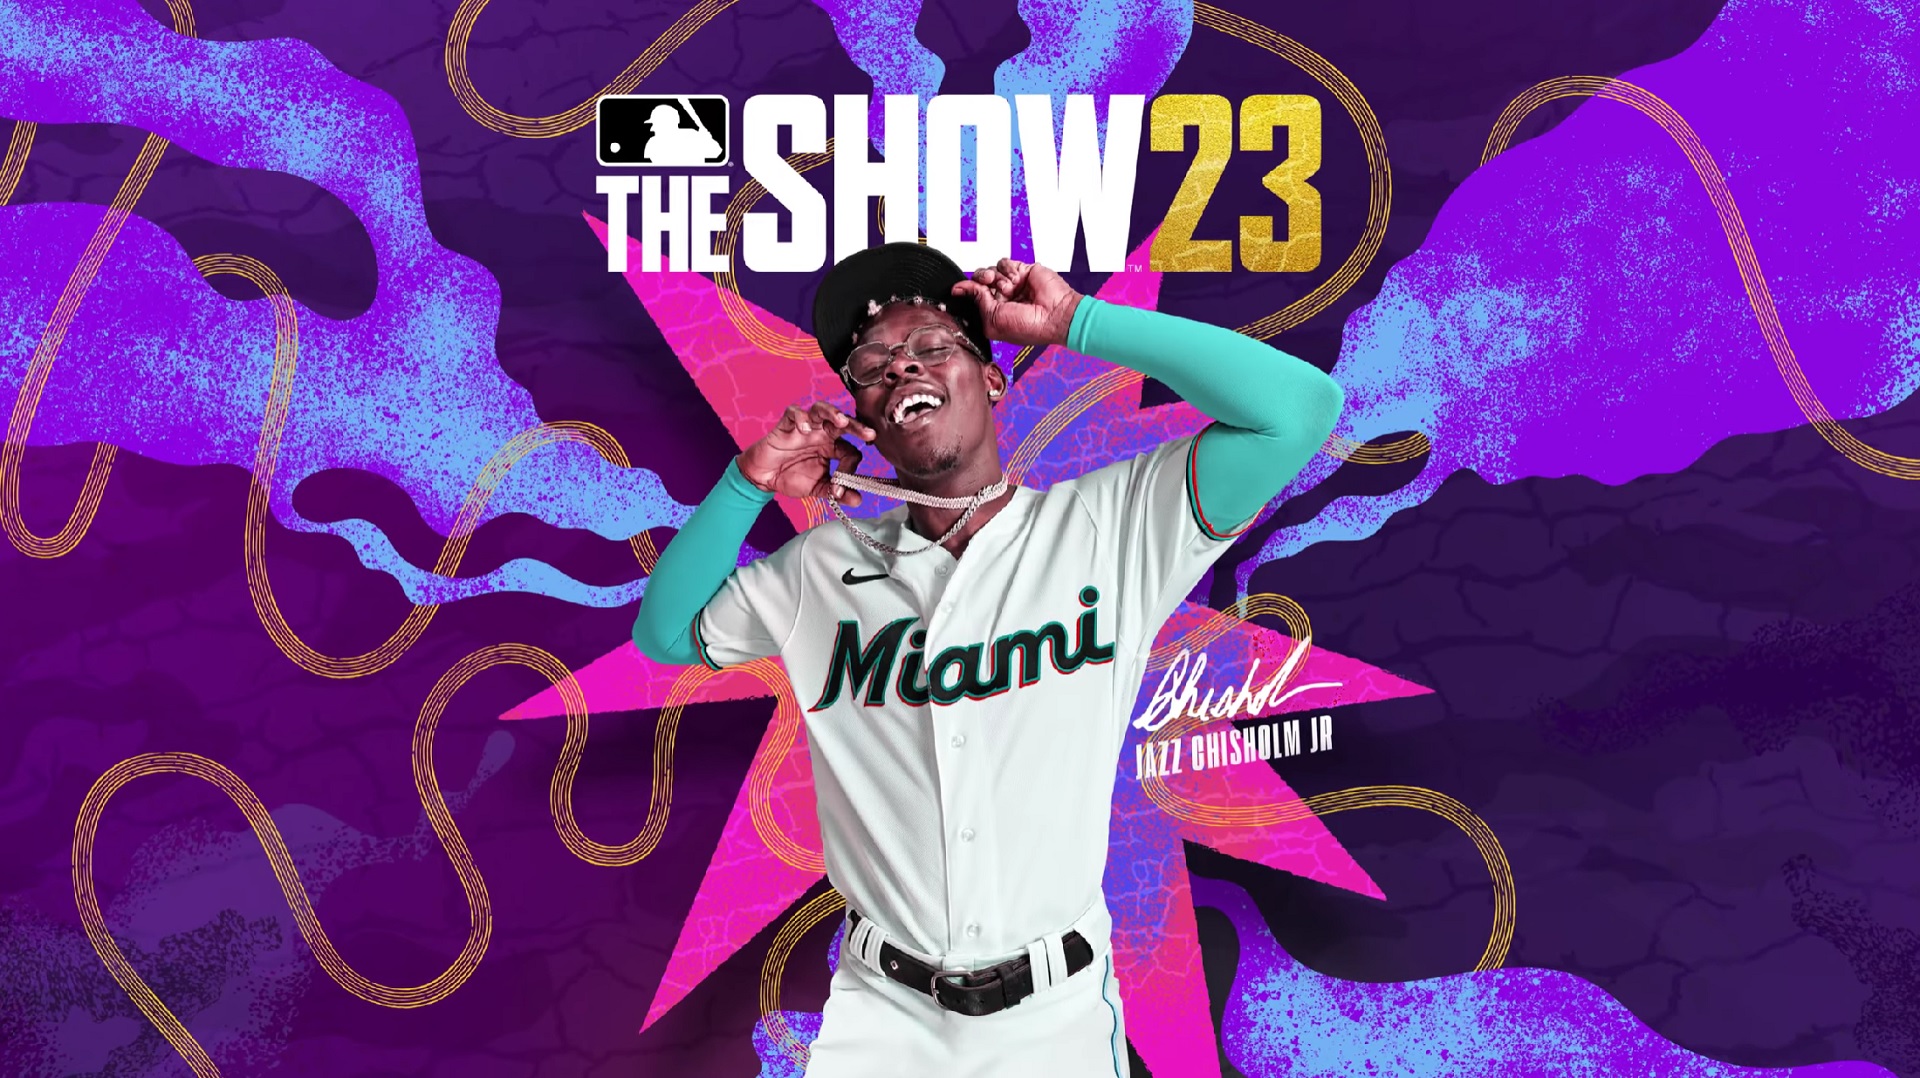 MLB The Show 23 launches in Xbox Game Pass in March 2023 Windows Central